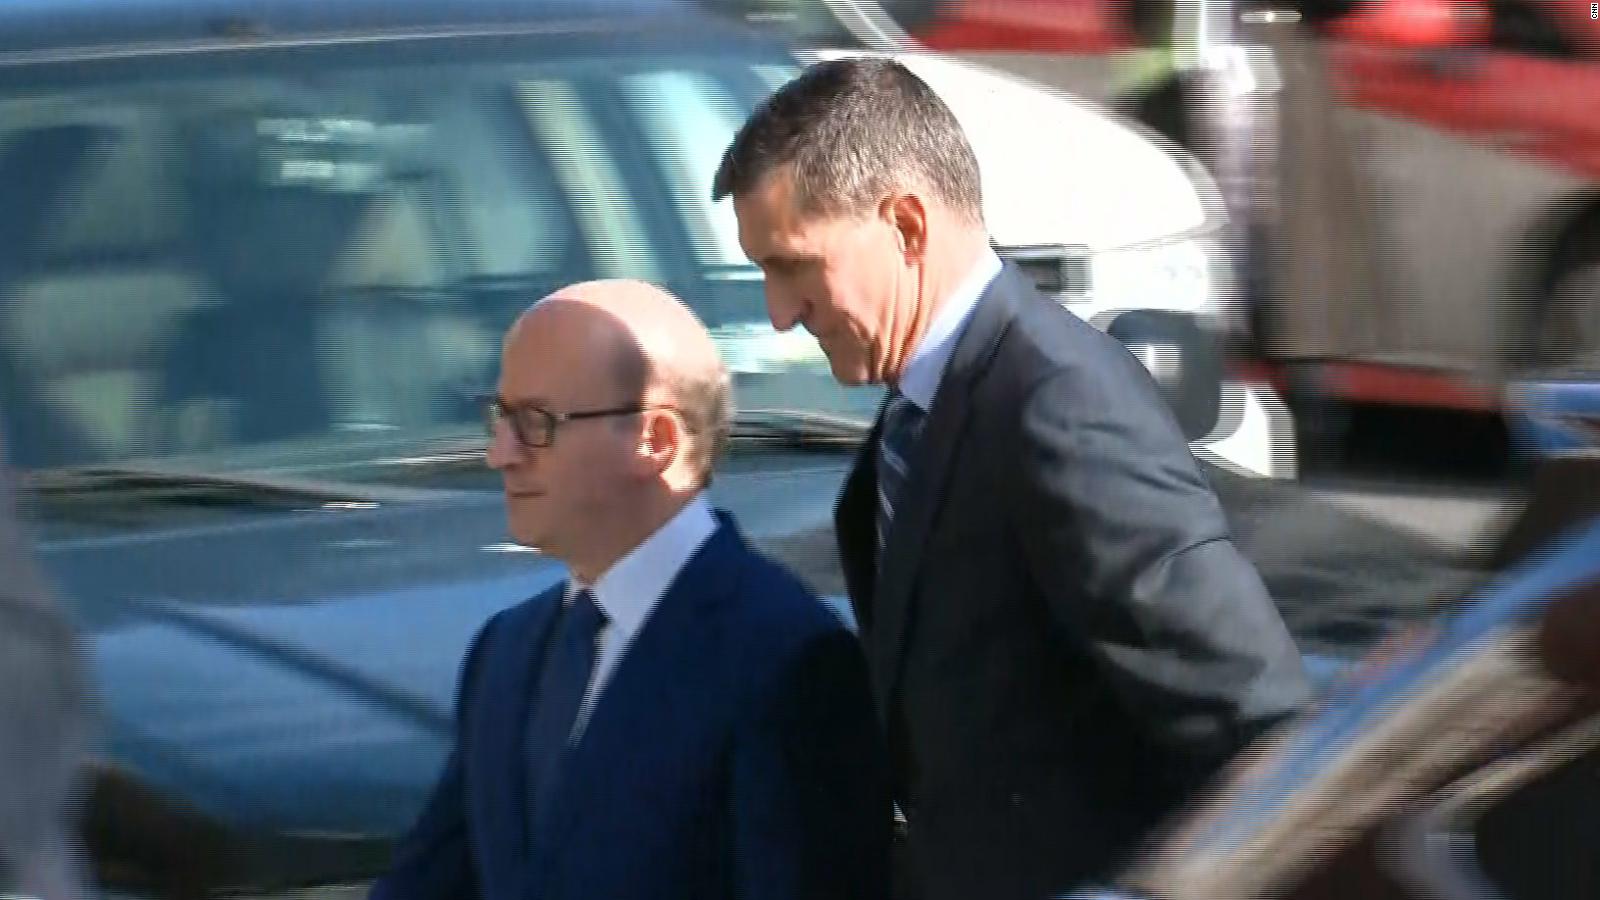 Michael Flynn pleads guilty to lying to FBI, is cooperating with ...